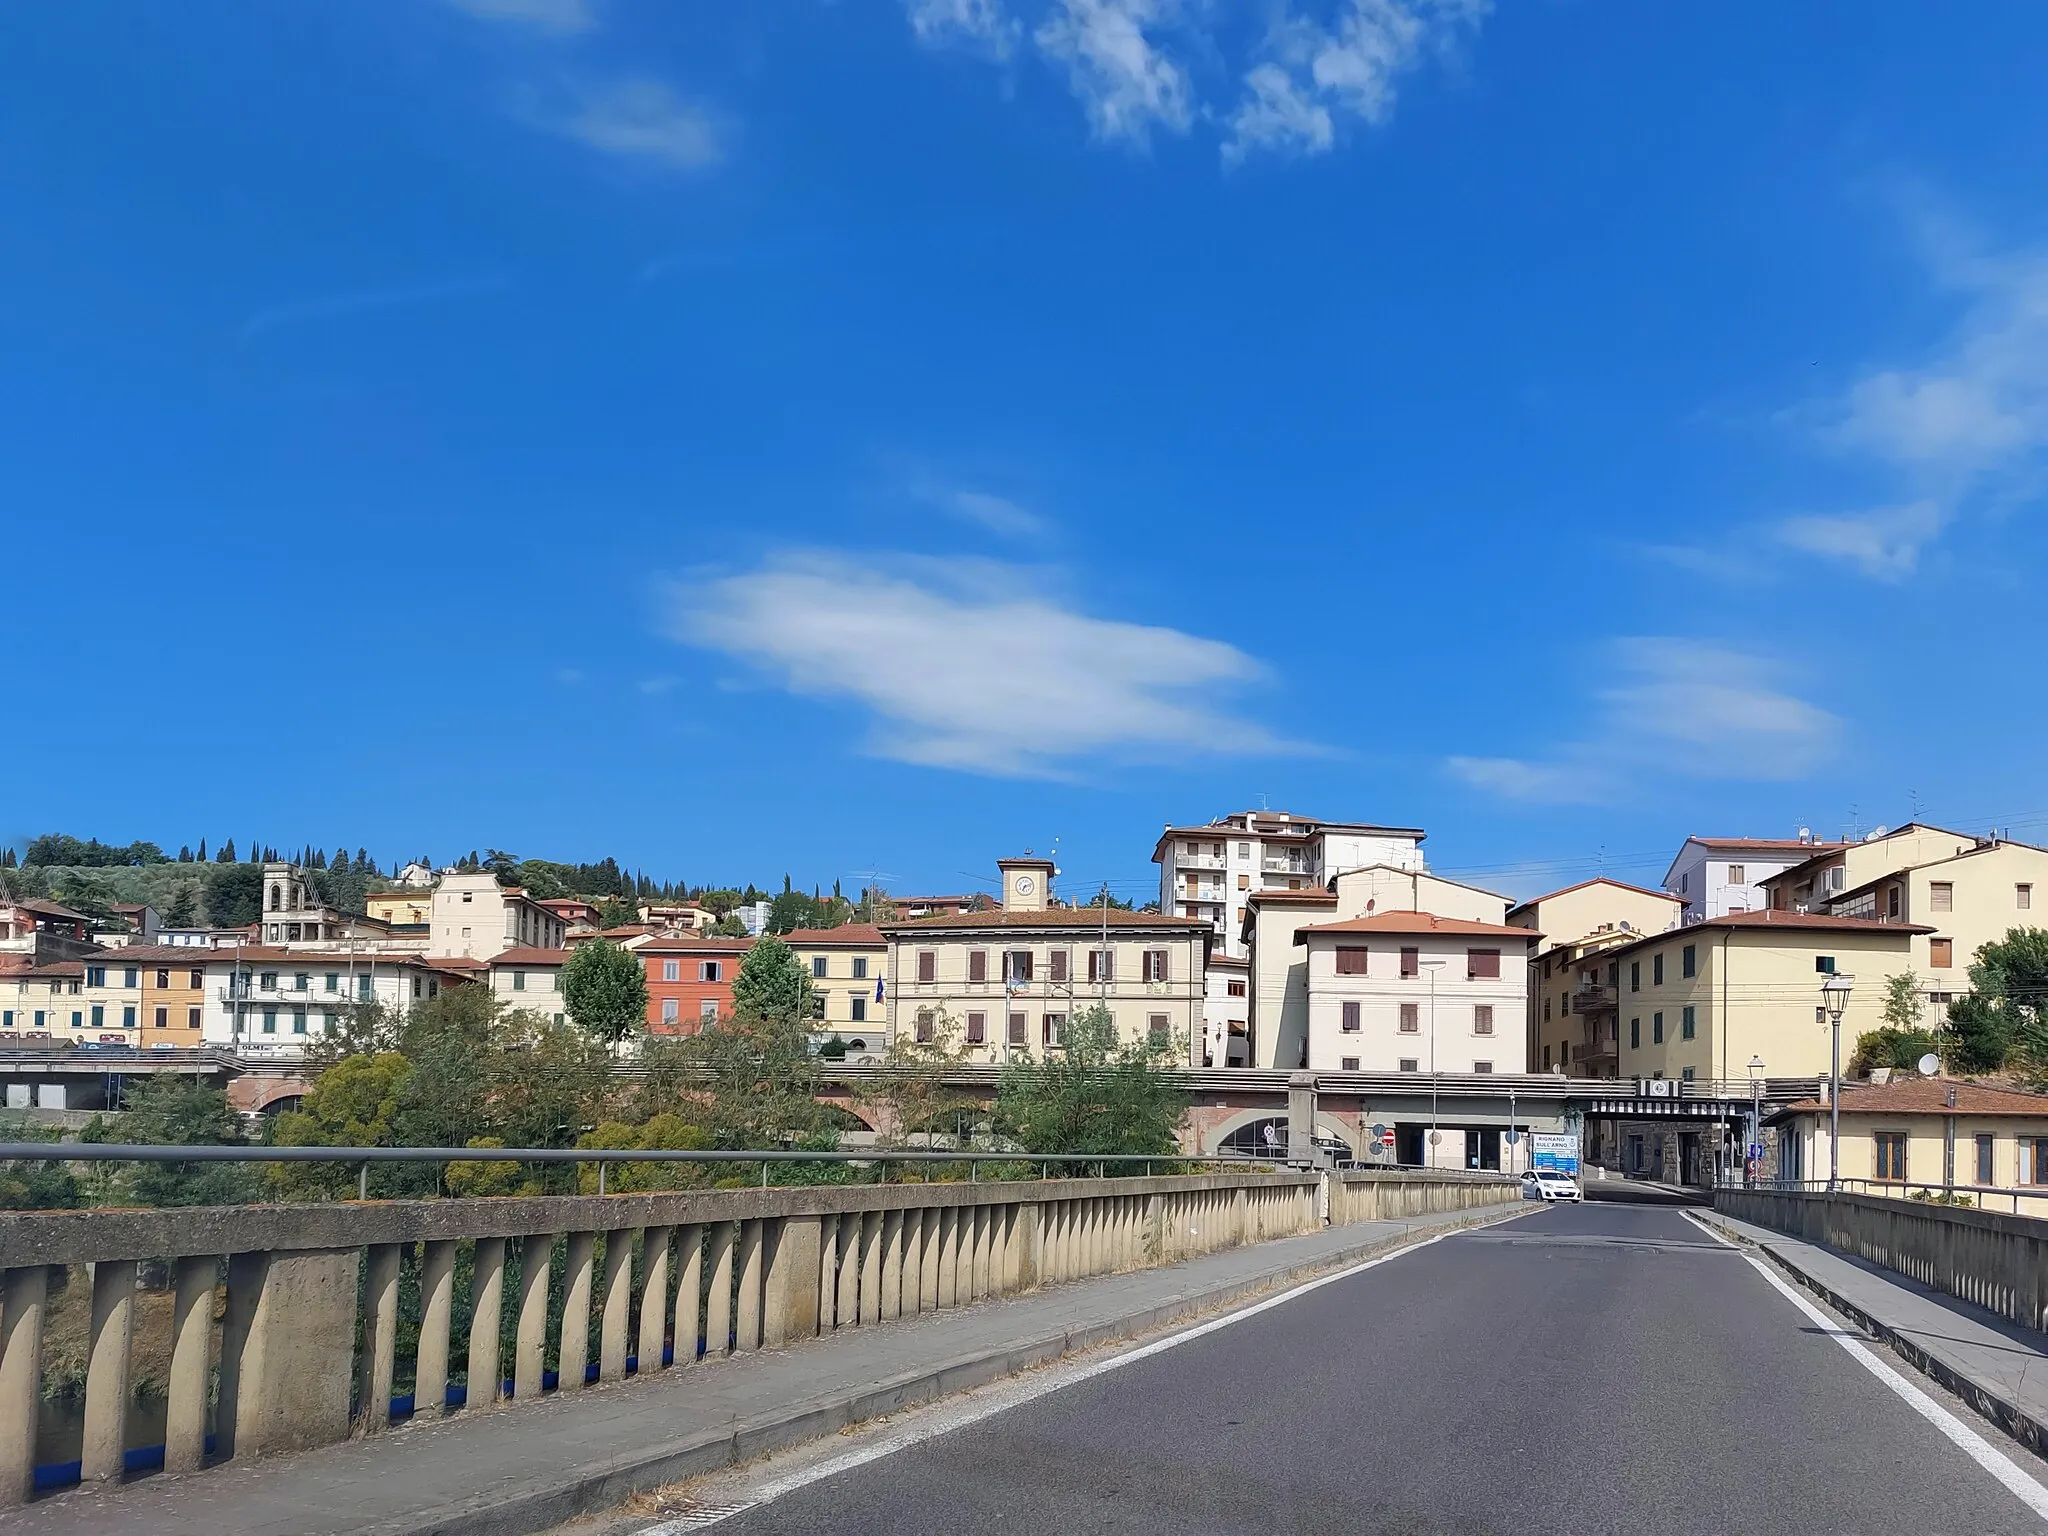 Photo showing: Rignano sull'Arno seen from the Ponte Mediceo